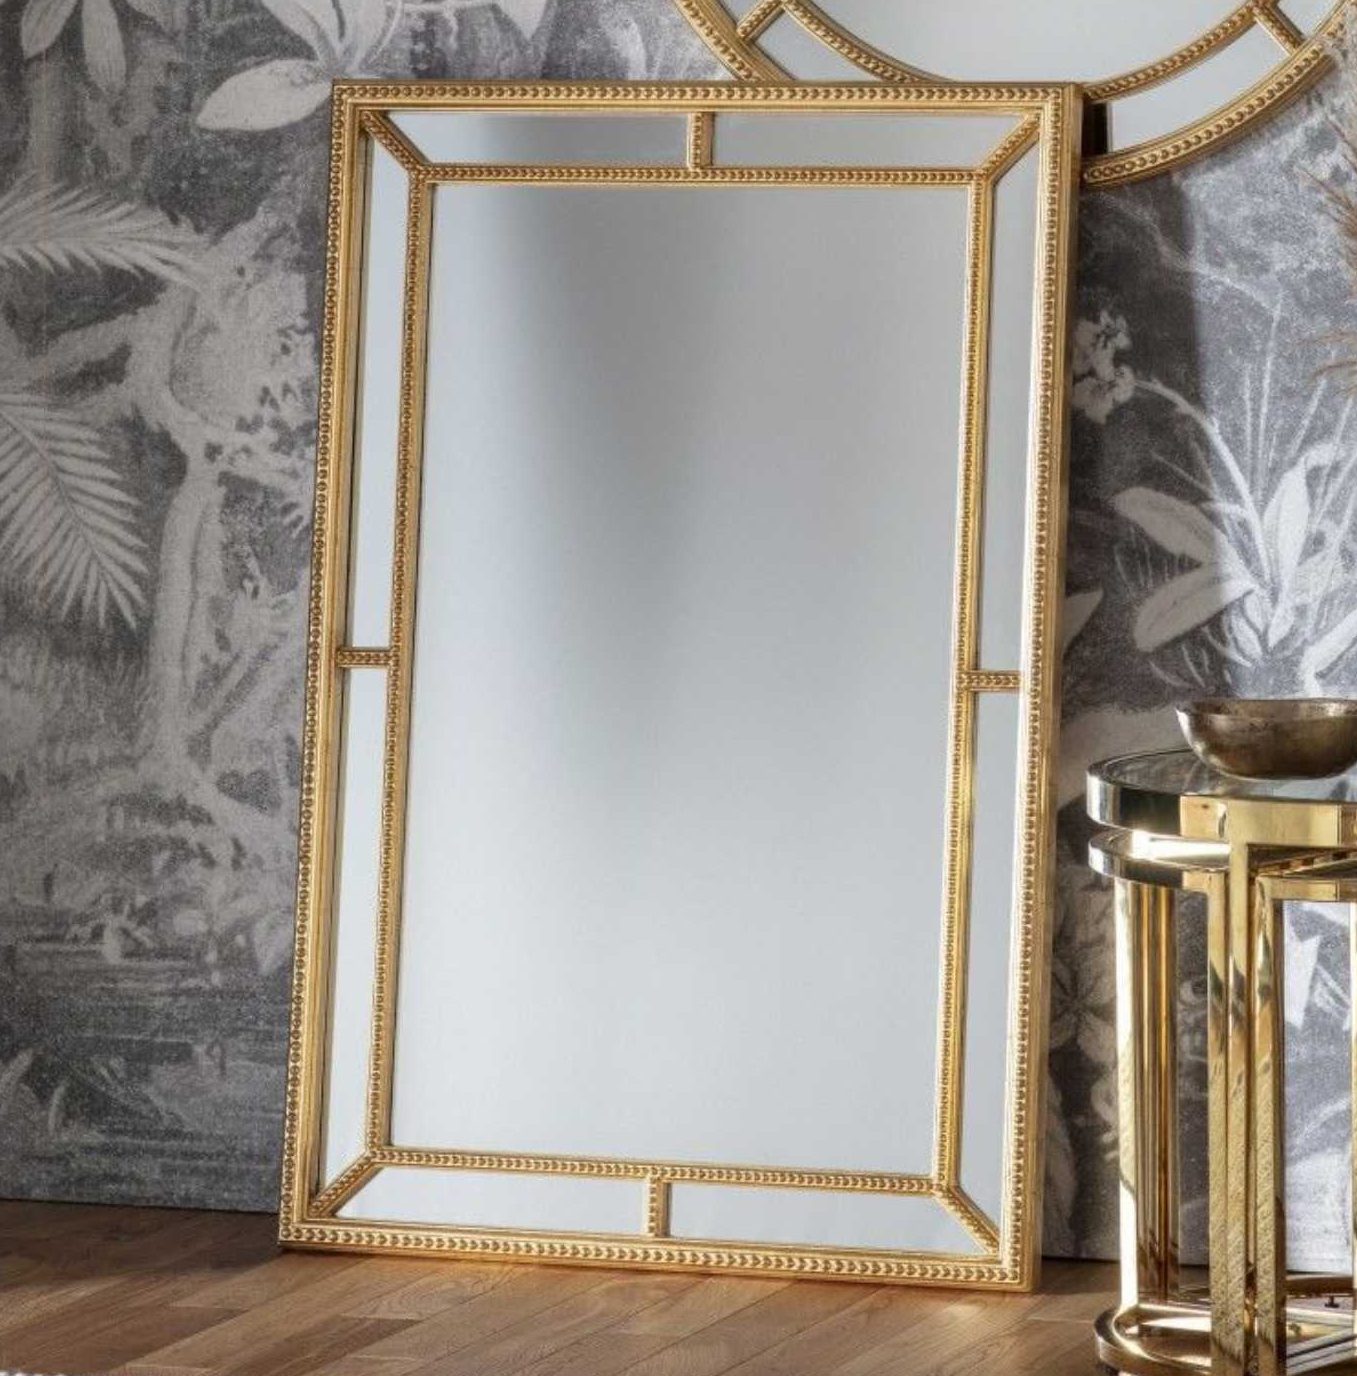 How to Choose Antique Mirror Beaded, Smart Solution, Get Quality and Reliable Products!